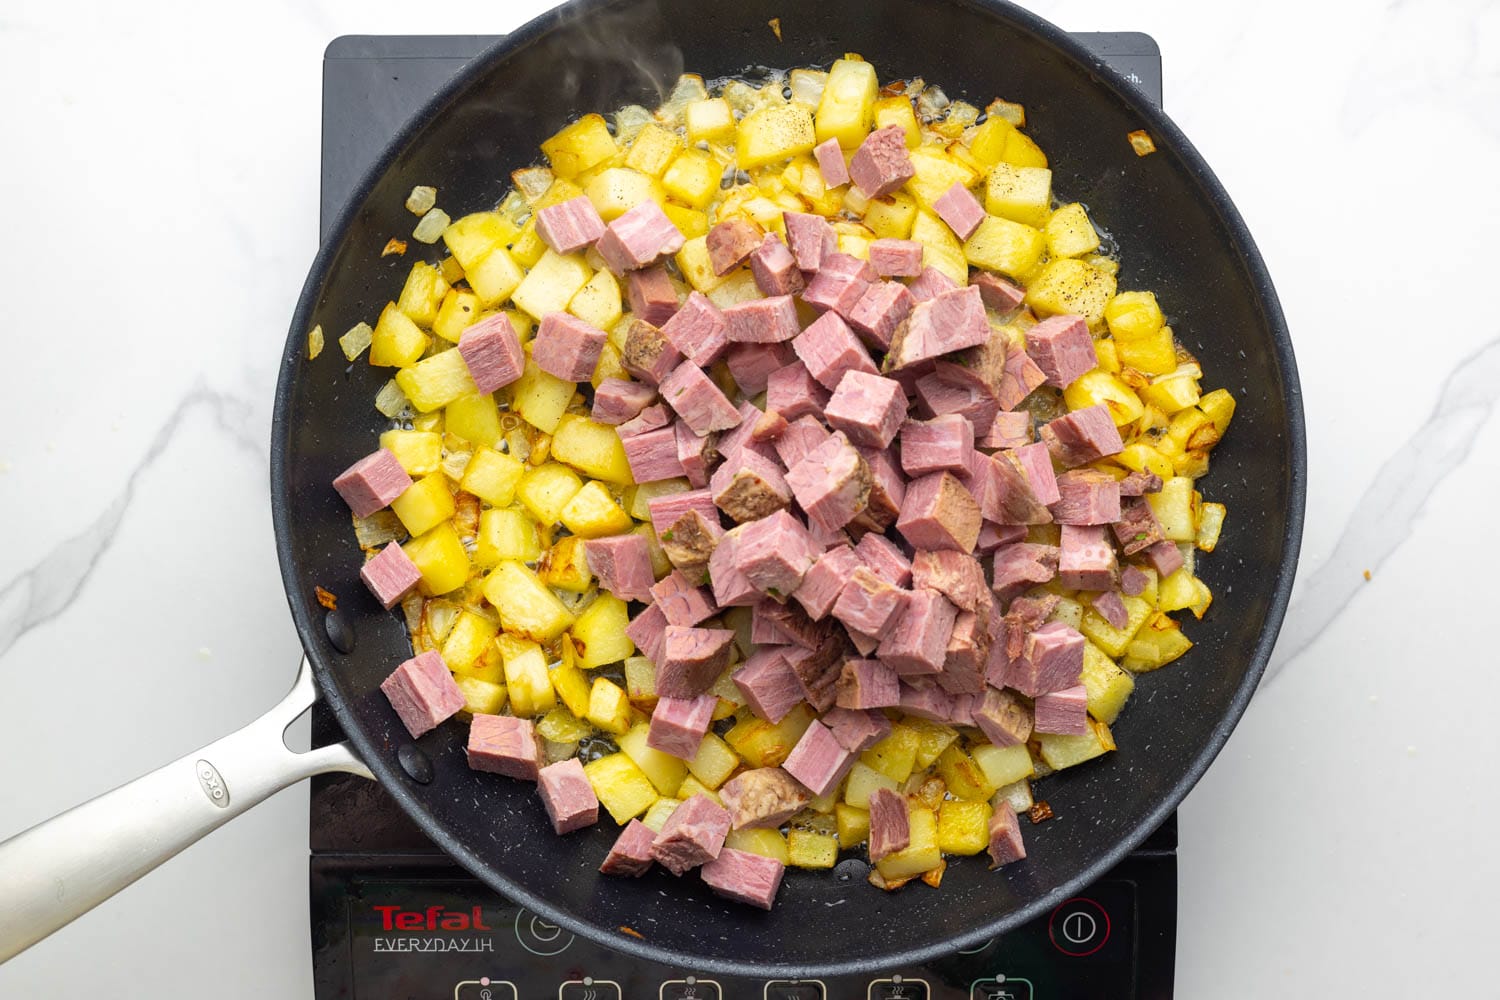 cooked, cubed corned beef added to cooked diced potatoes to make corned beef hash.